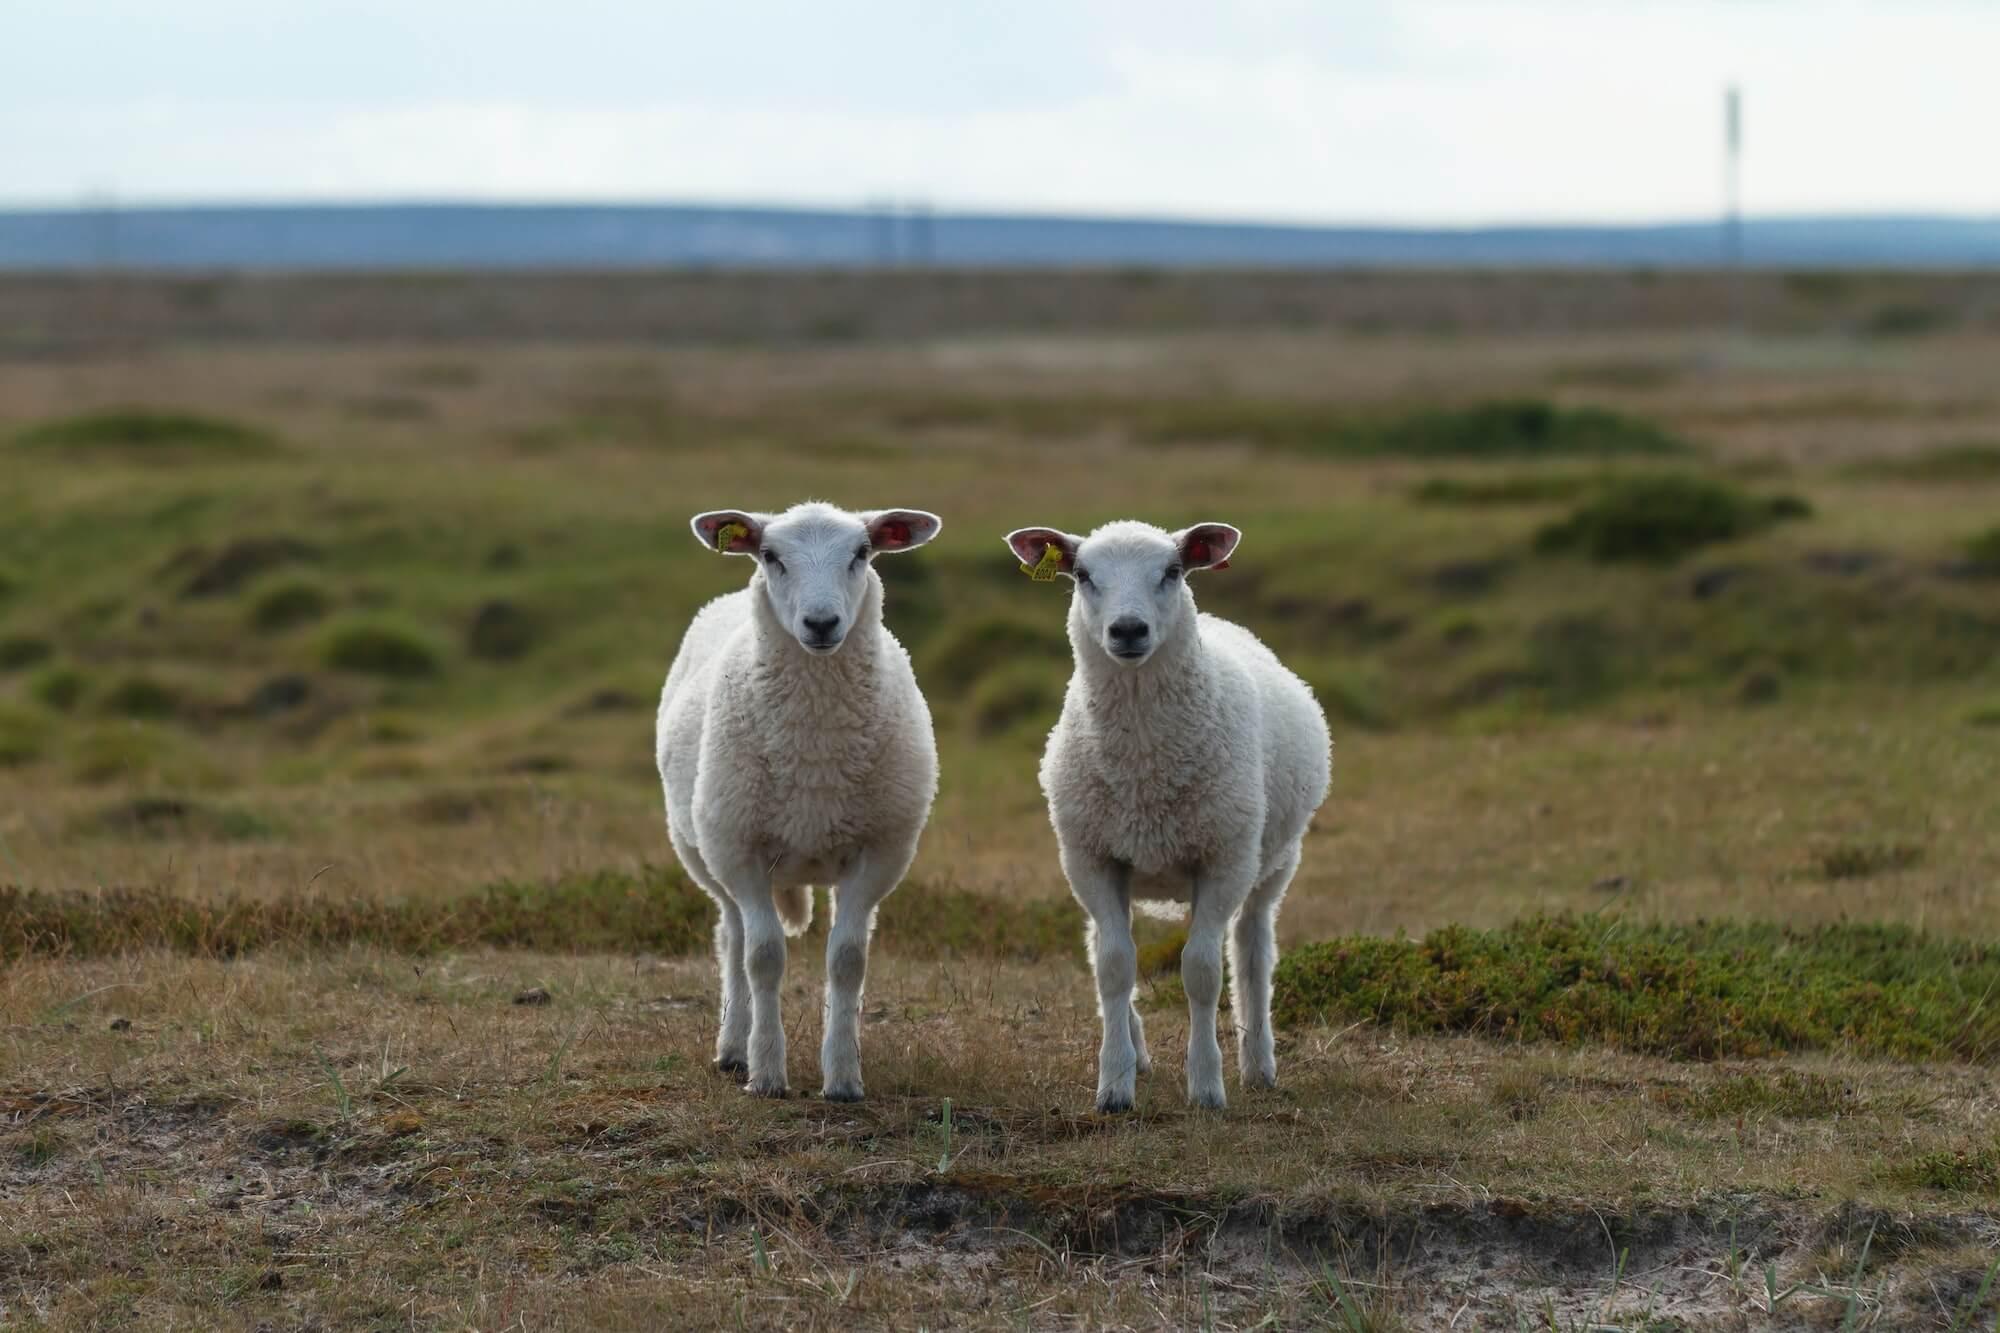 Two sheep stood next to each other in a grassy field looking at the camera.